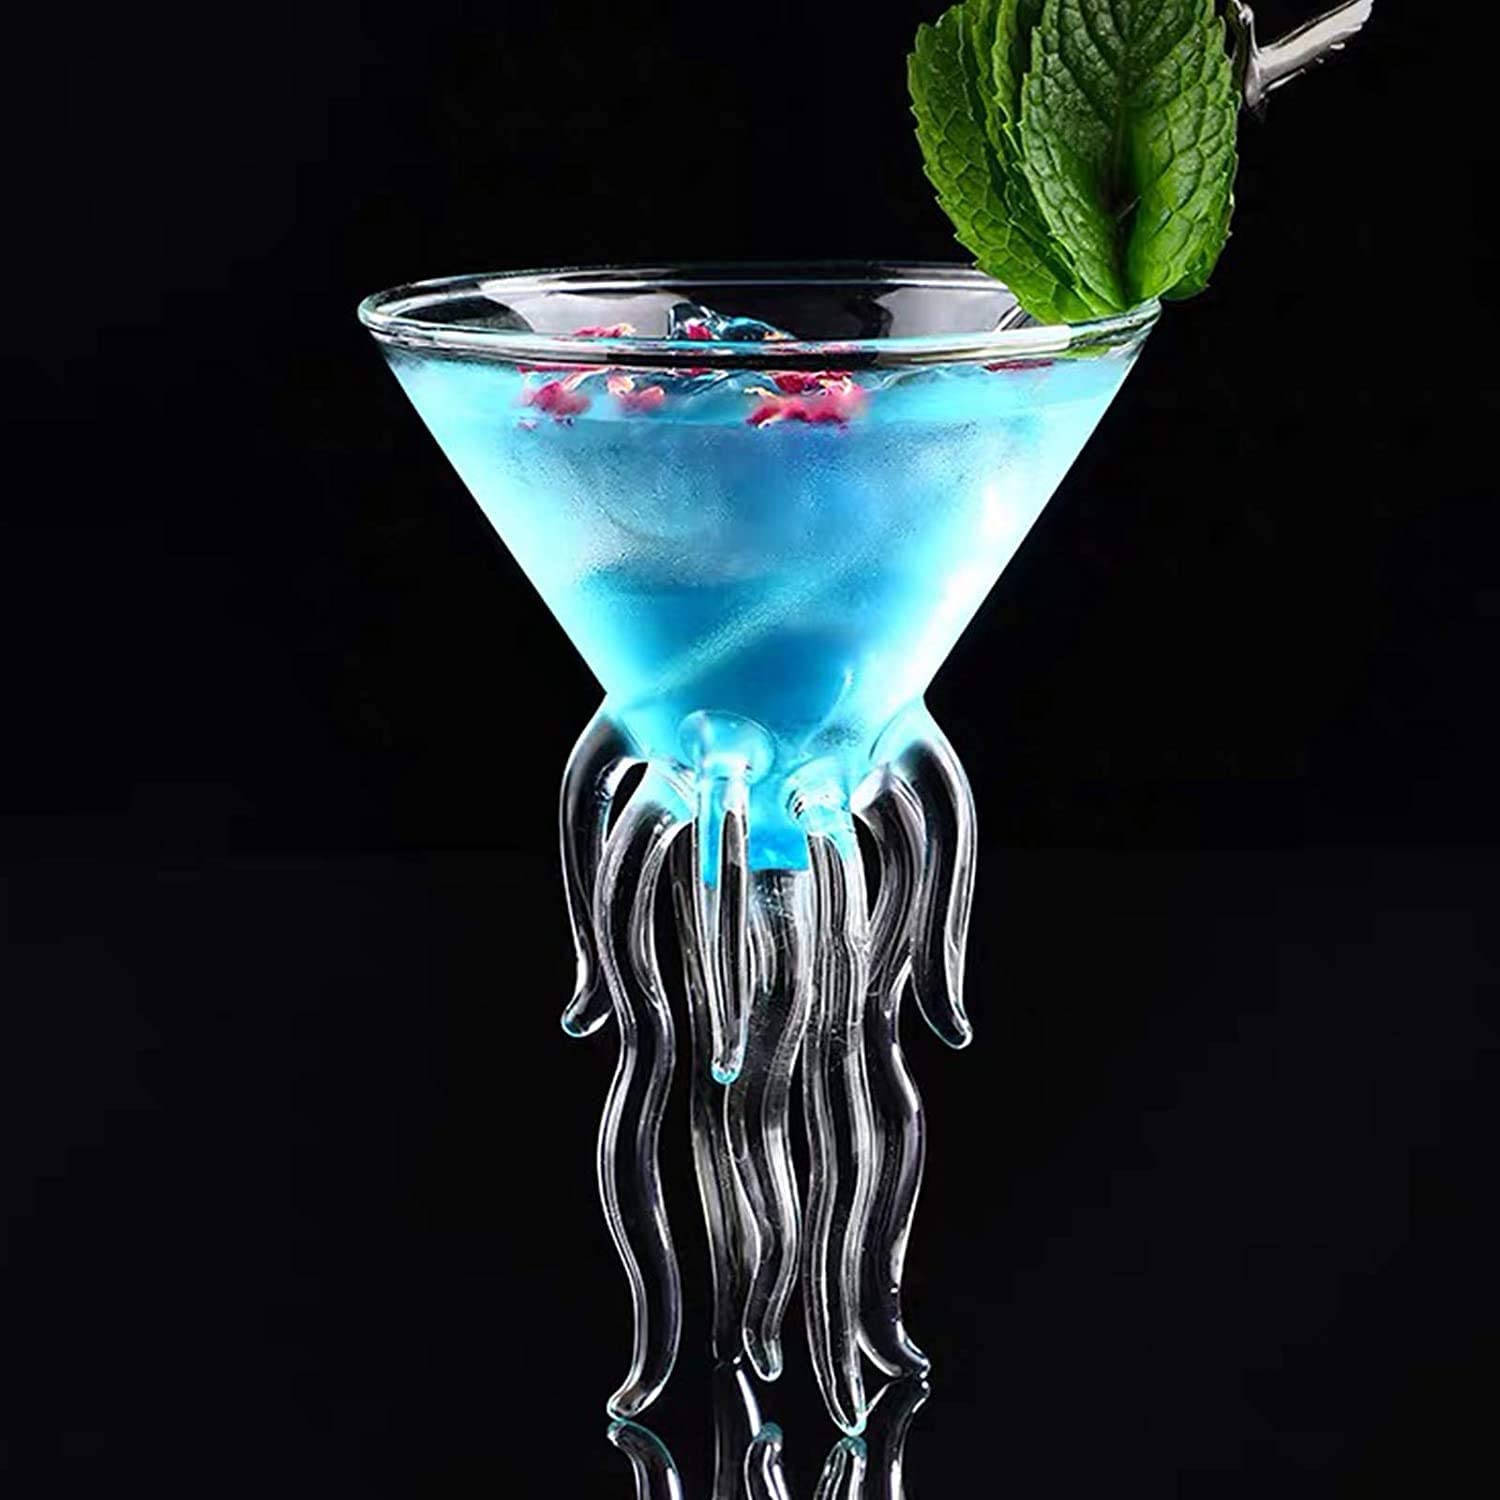 Jellyfish martini glasses - Cocktail Glasses Made To Look Like a Jellyfish/octopus